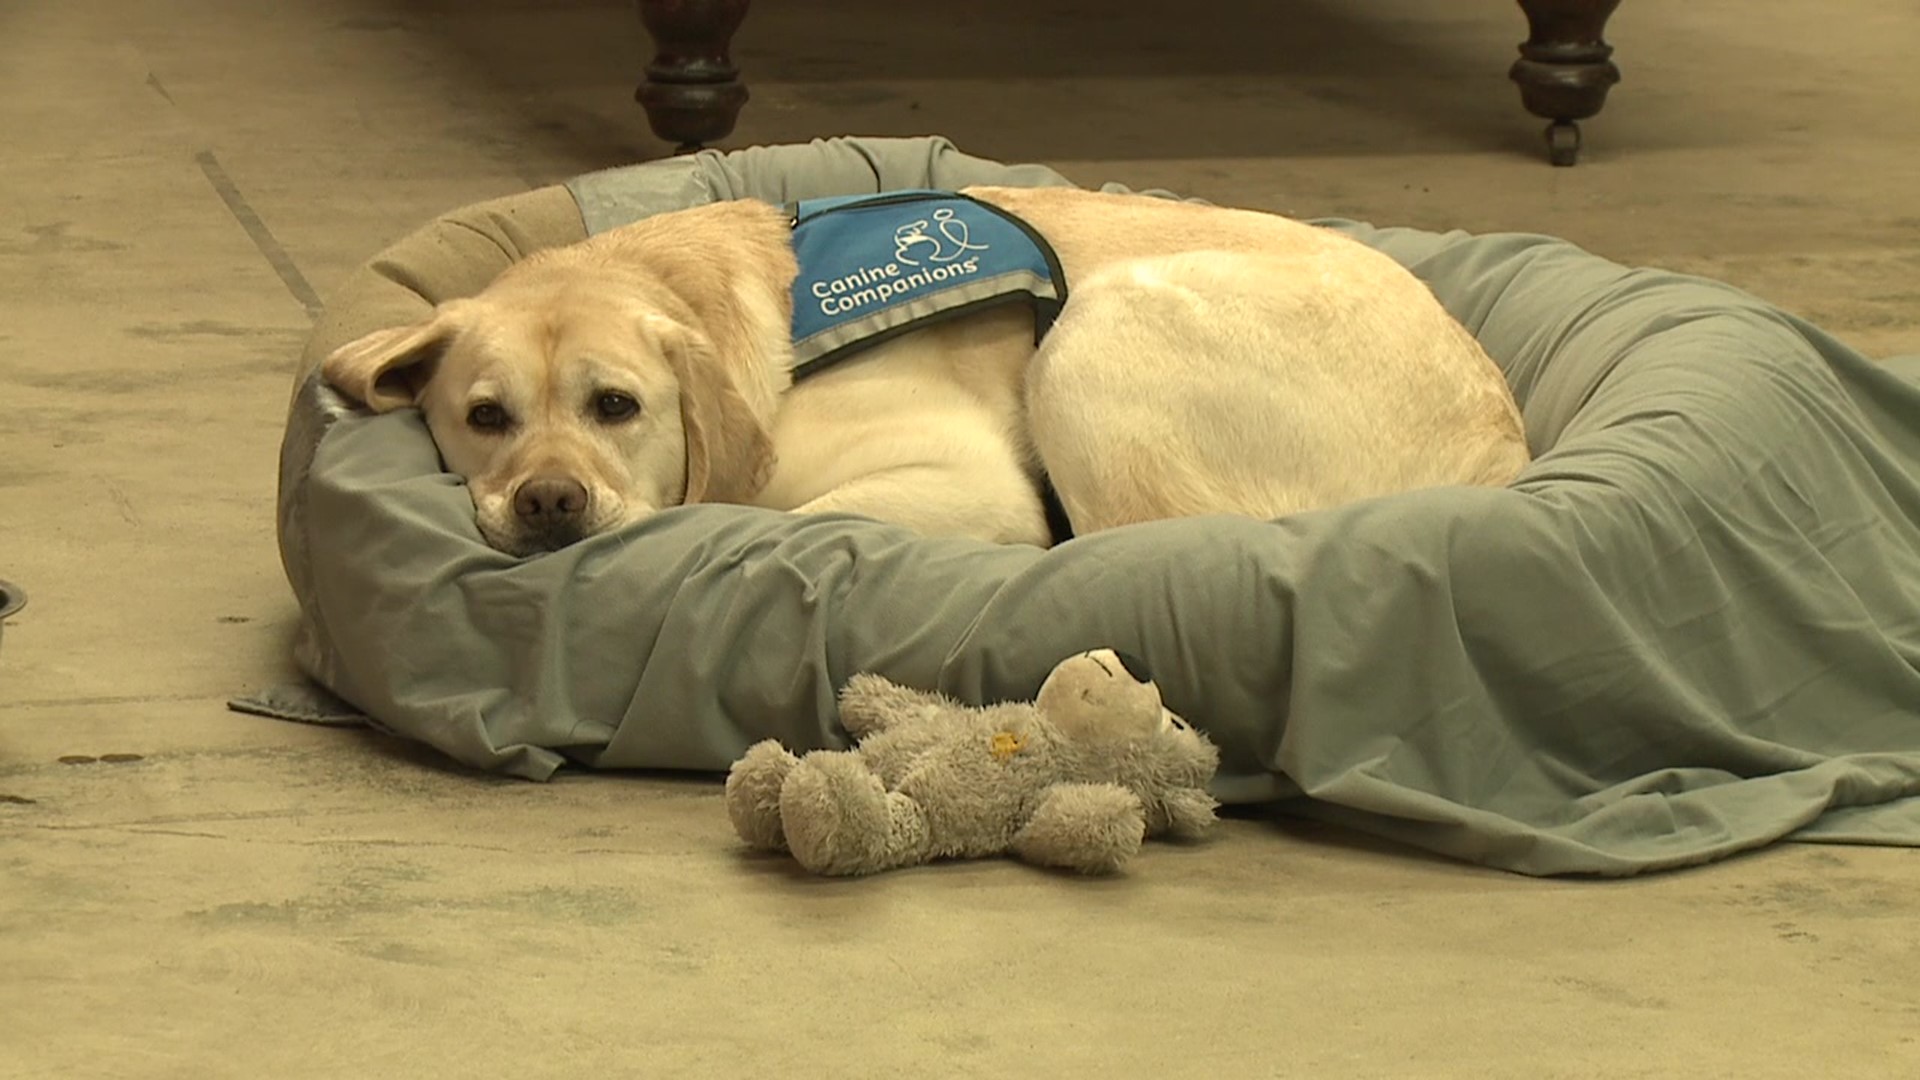 Canine Companions is an organization that provides service dogs to those who need them.